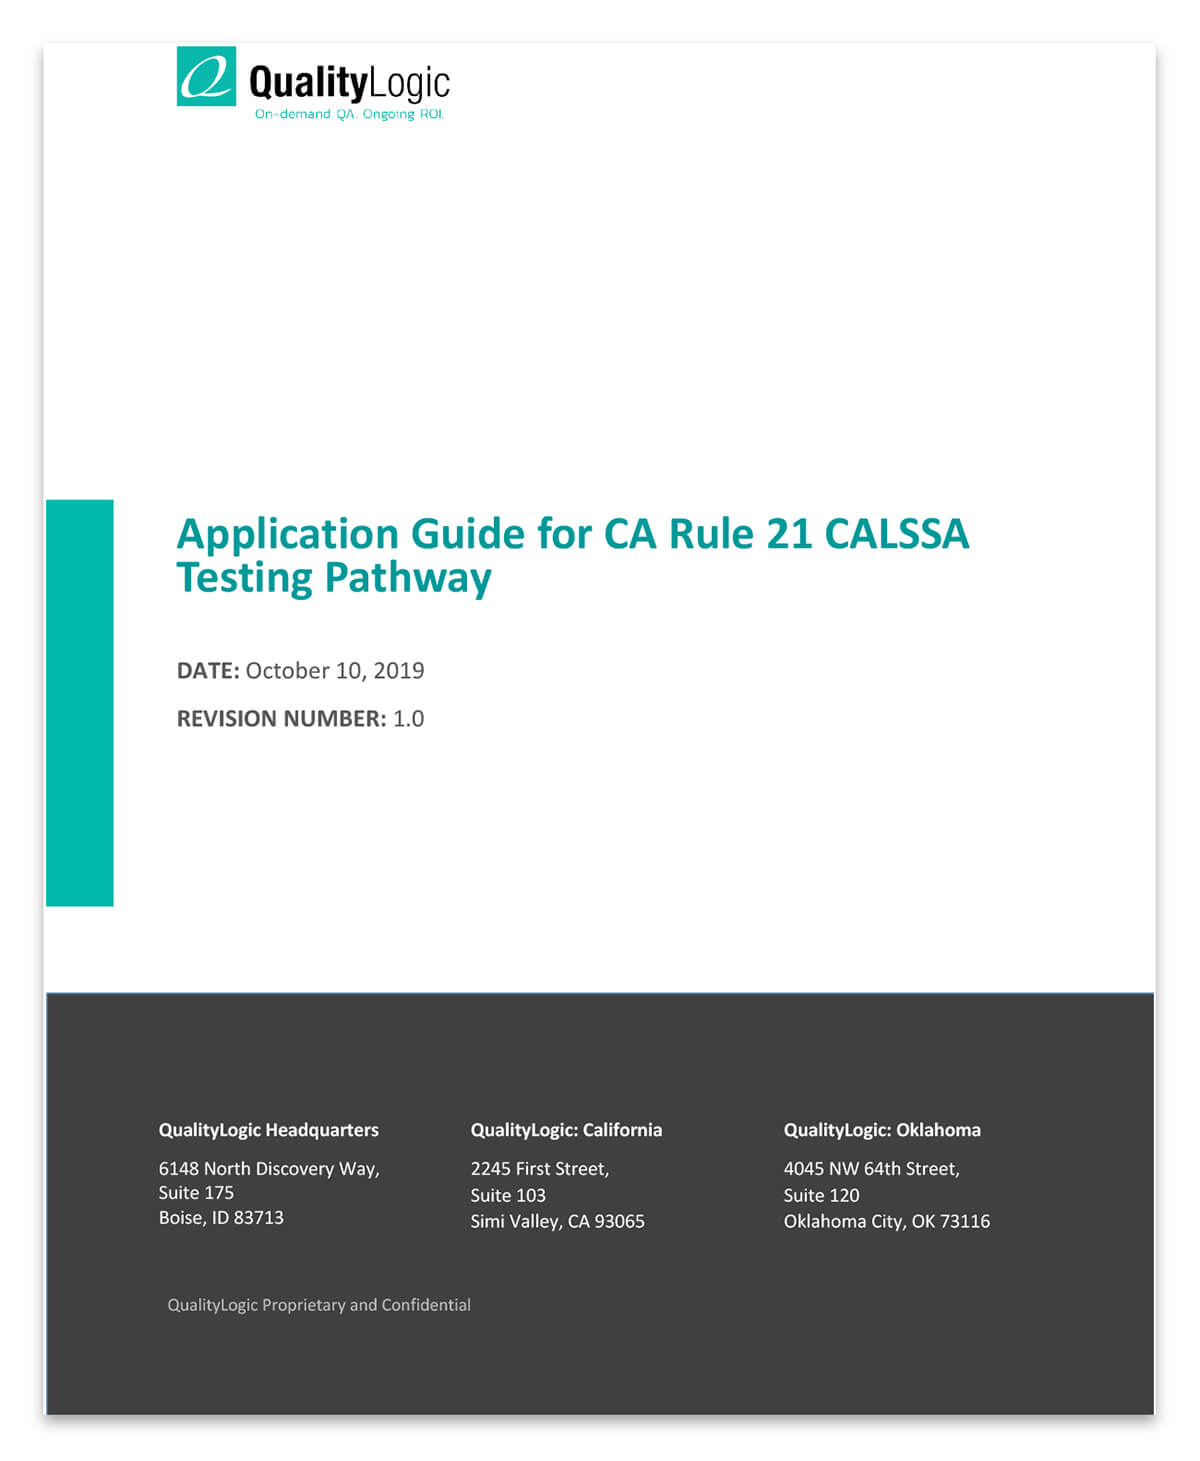 QualityLogic CALSSA Testing Pathway Application Guide